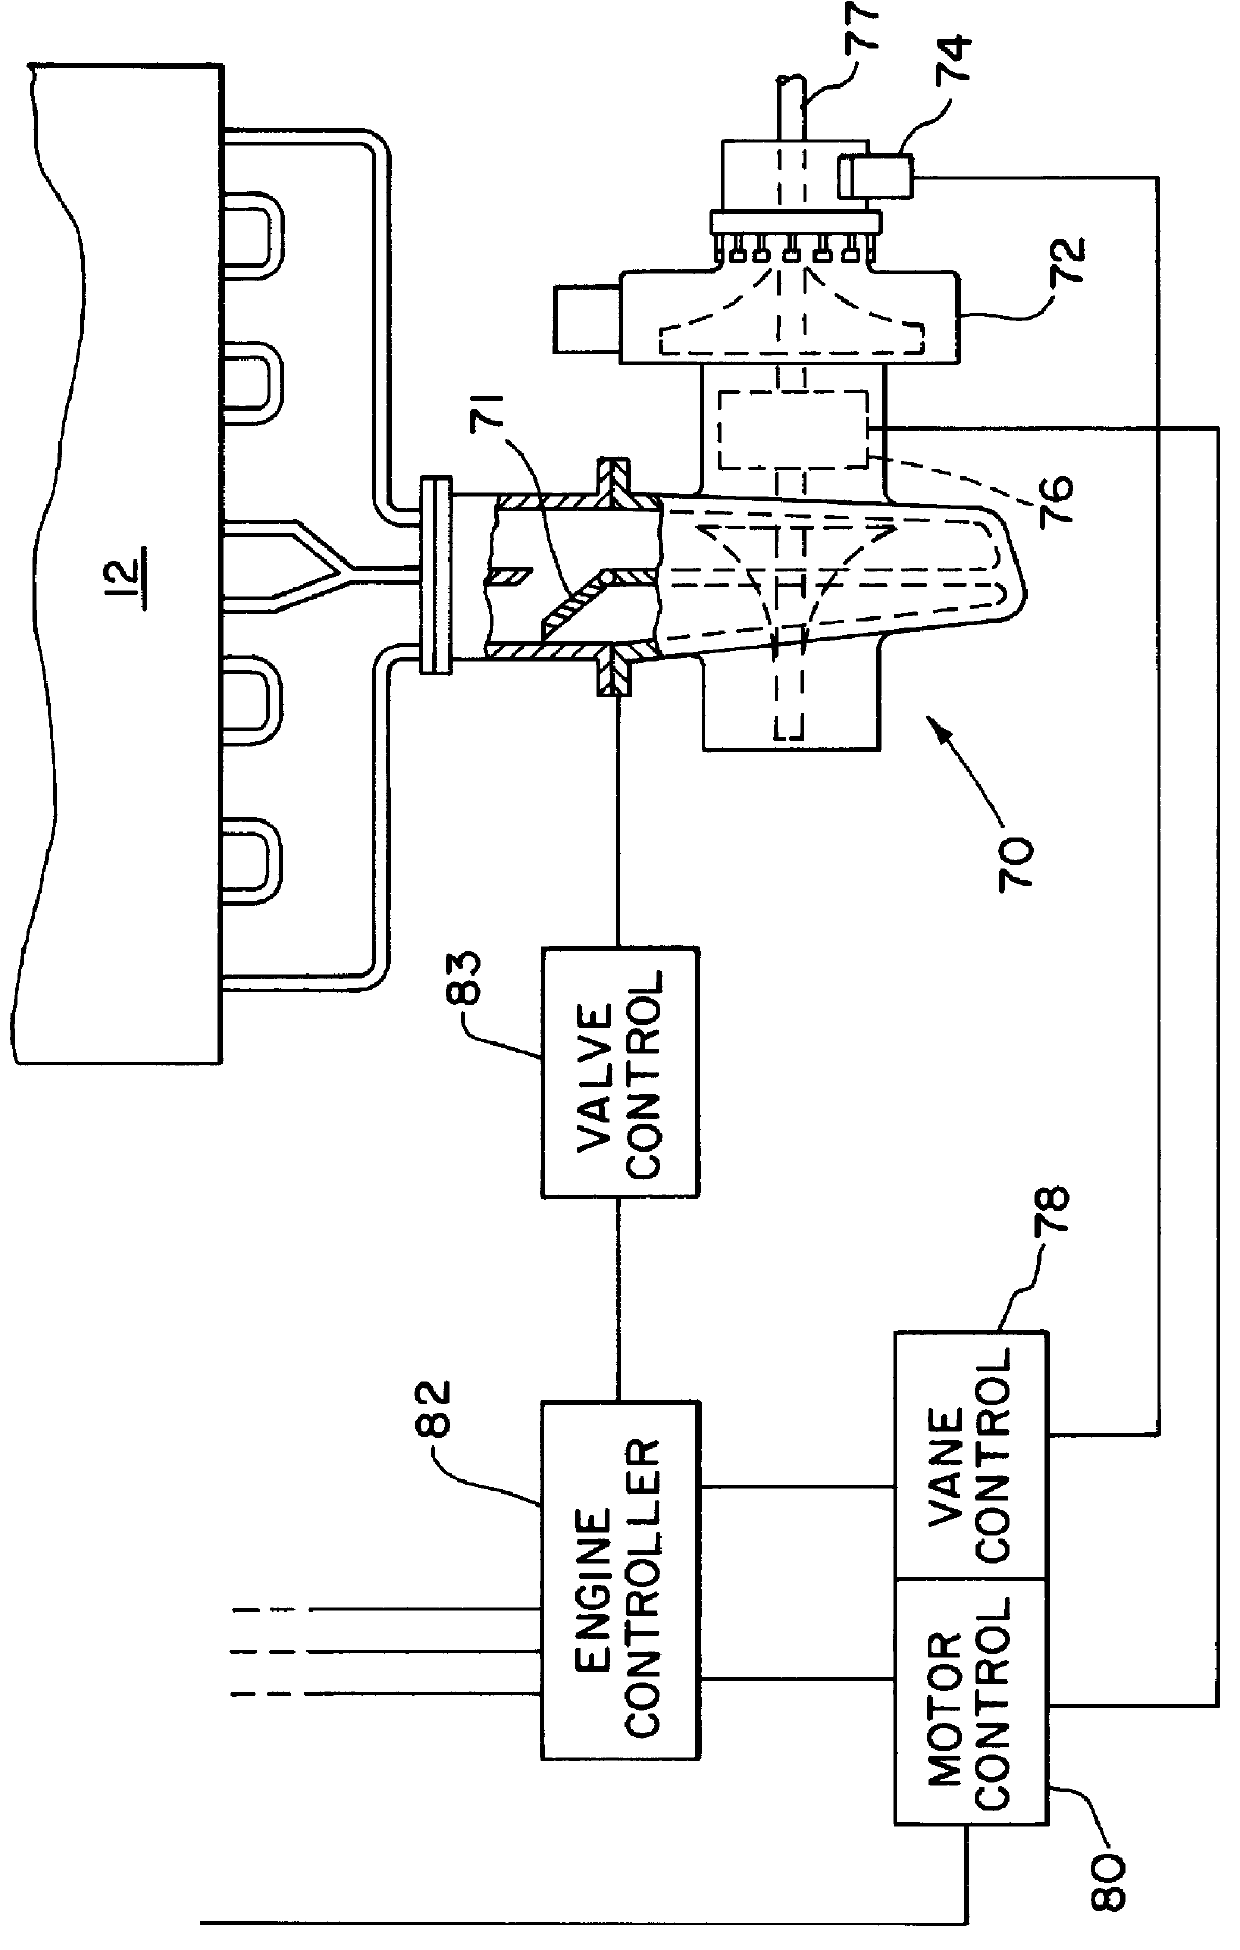 Motor-assisted variable geometry turbocharging system